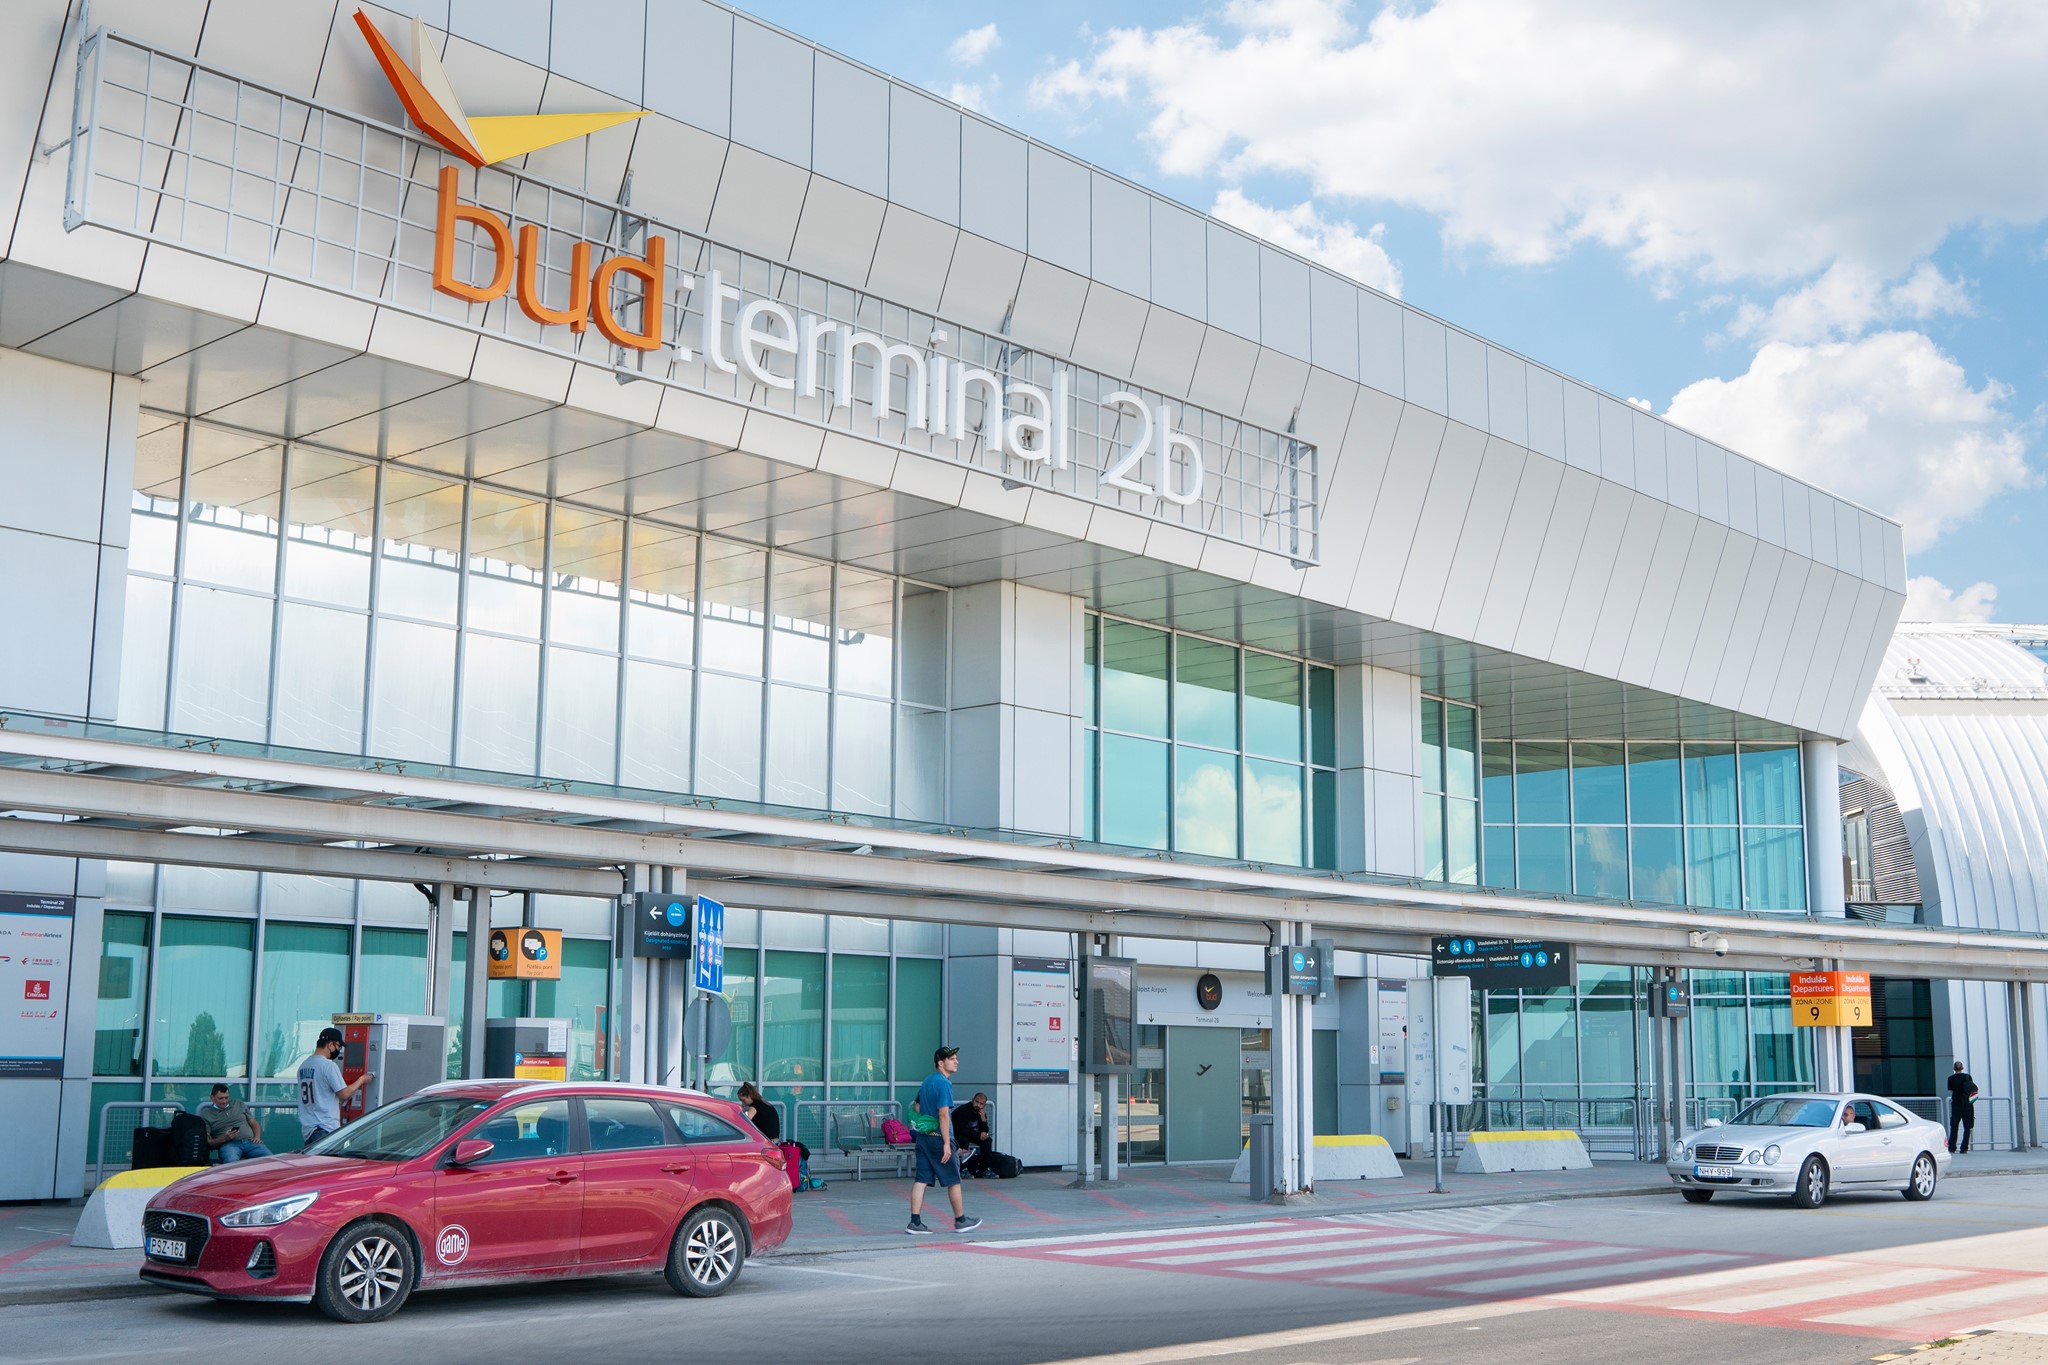 Sale of Budapest Airport Moves Closer